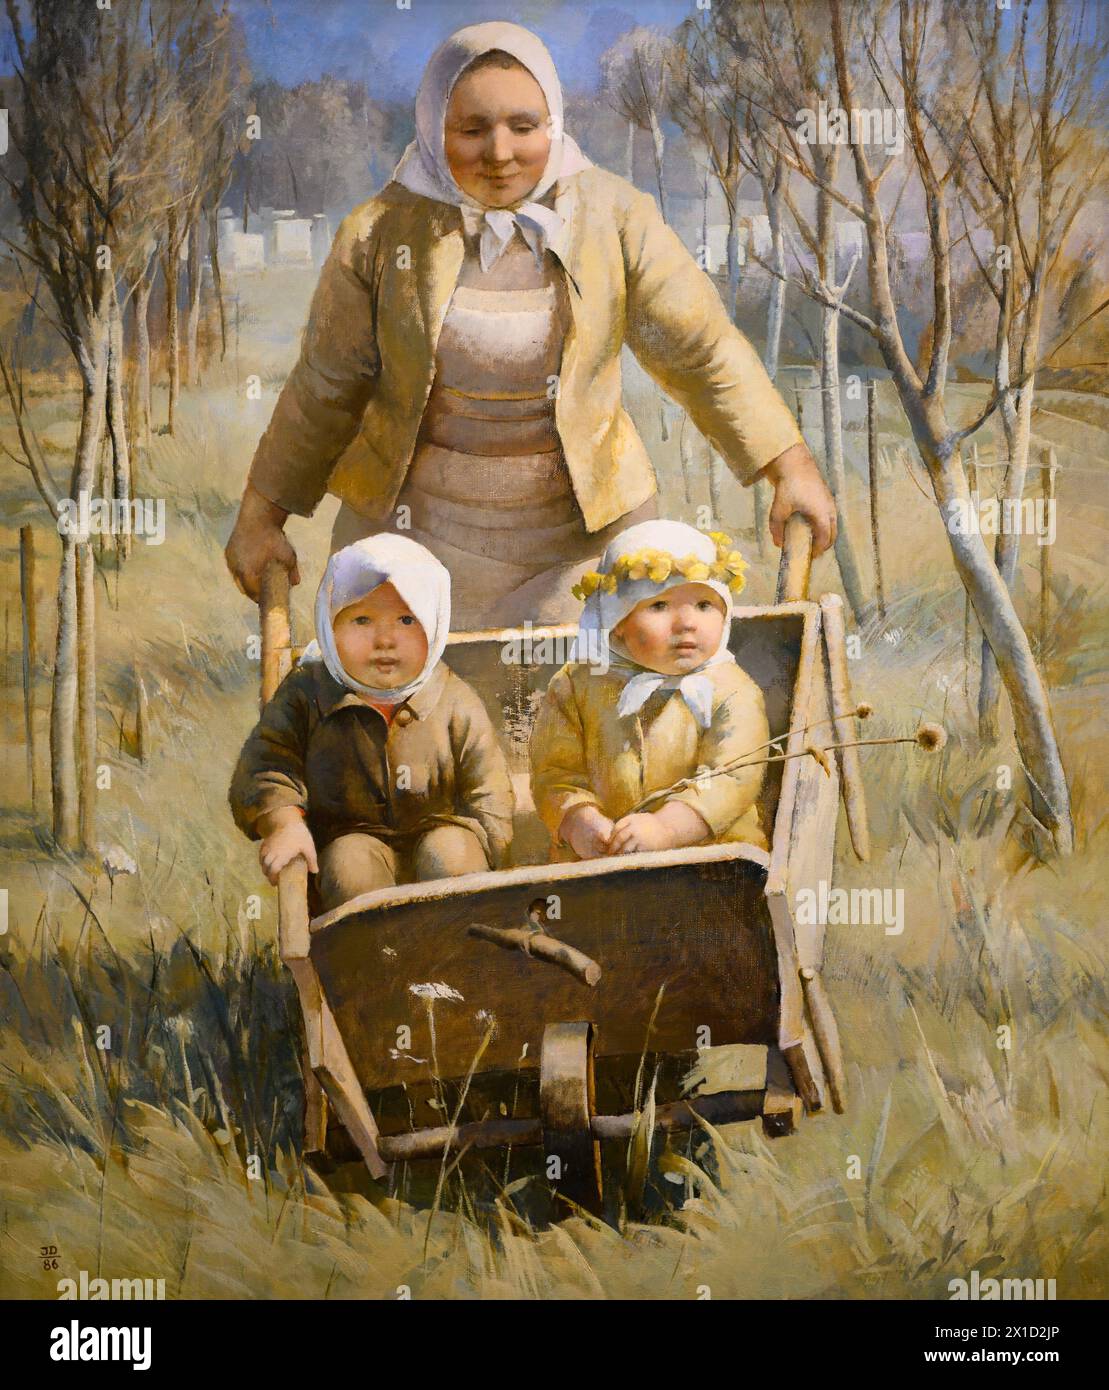 'Lauku Madonna' ['Country Madonna'] (1986). A painting by Inta Dobrāja (1940 – 2020). Daugavpils Local History and Art Museum. Stock Photo